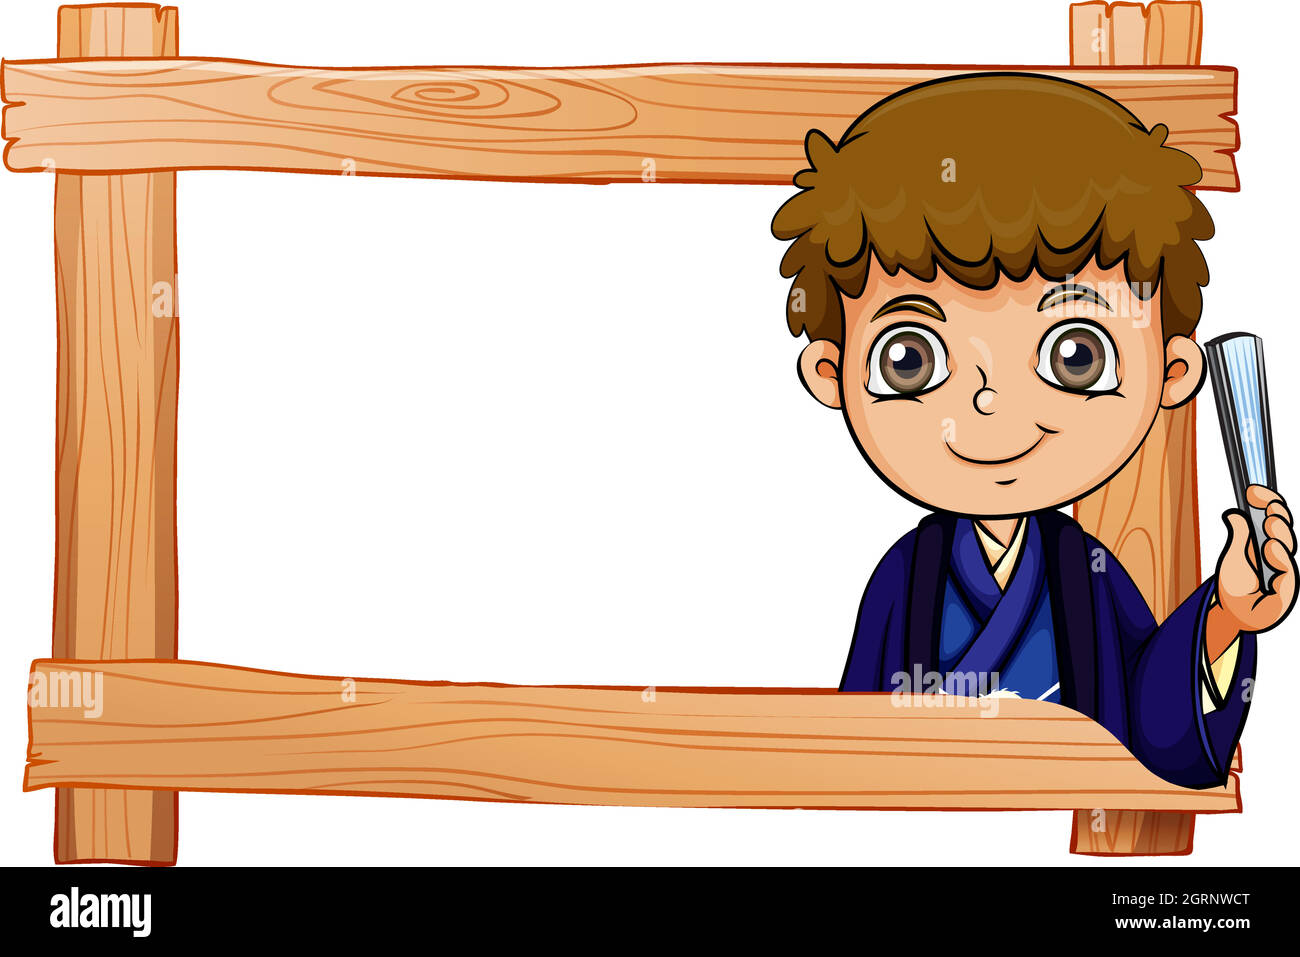 A wooden frame with a young boy Stock Vector